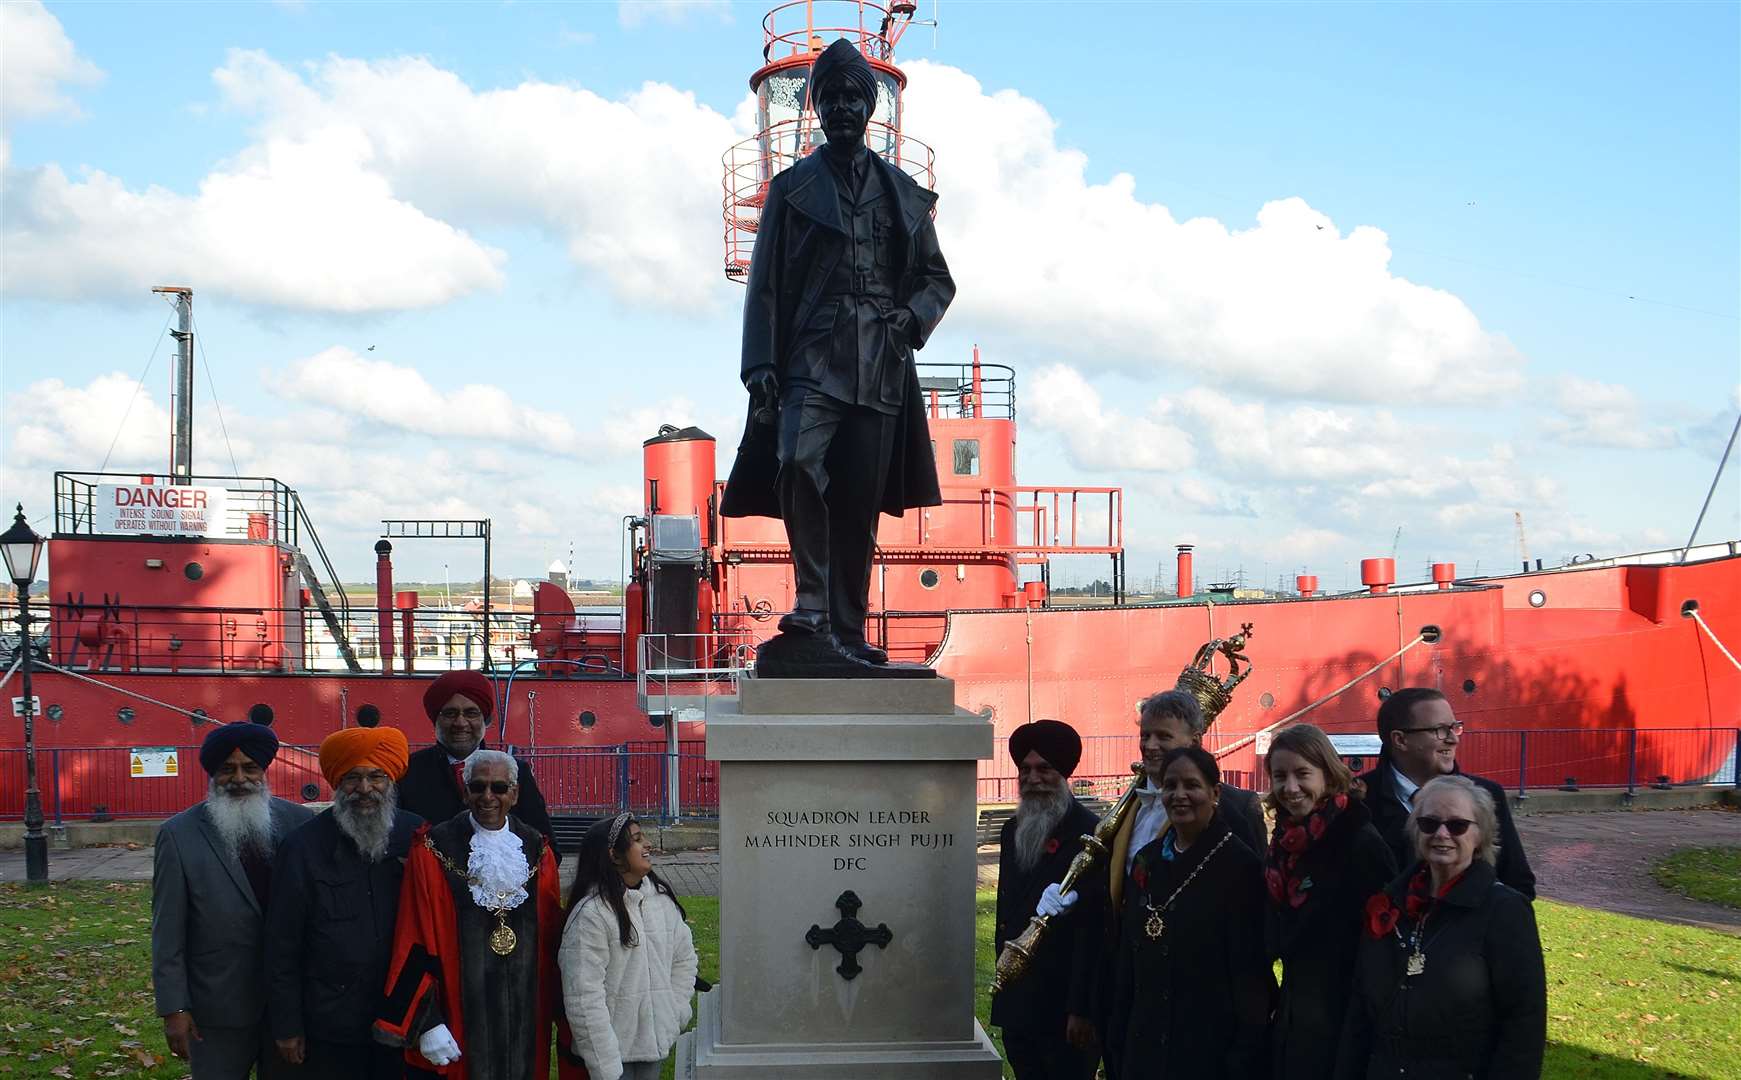 Members of the Sikh community at the RAF Squadron Leader Mohinder Singh Pujji statue in Gravesend. Picture: Jason Arthur